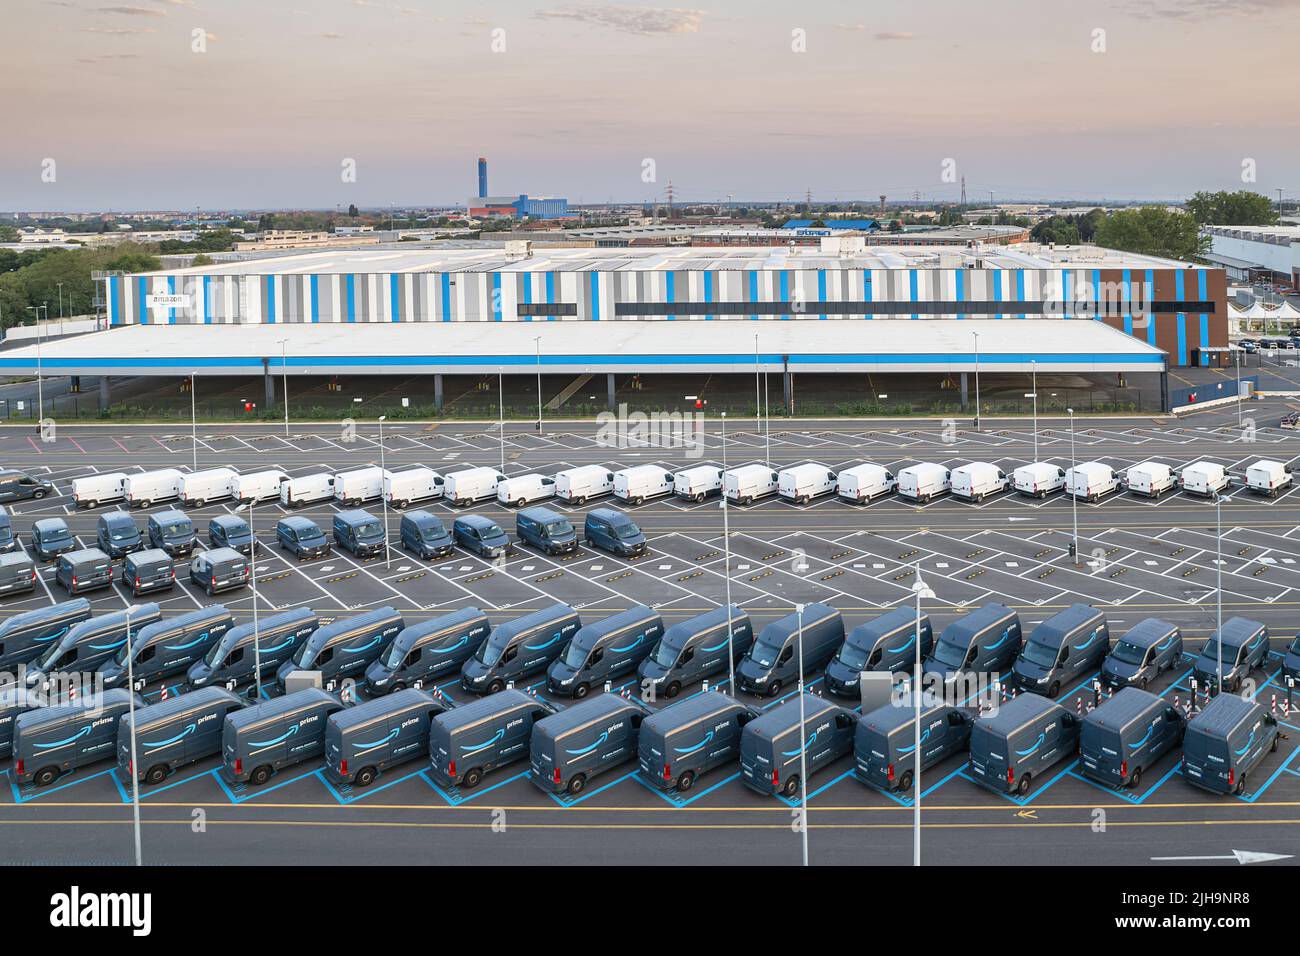 Top view of Amazon Prime electric delivery vans, parked at  the logistics hub of Amazon. Turin, Italy - July 2022 Stock Photo